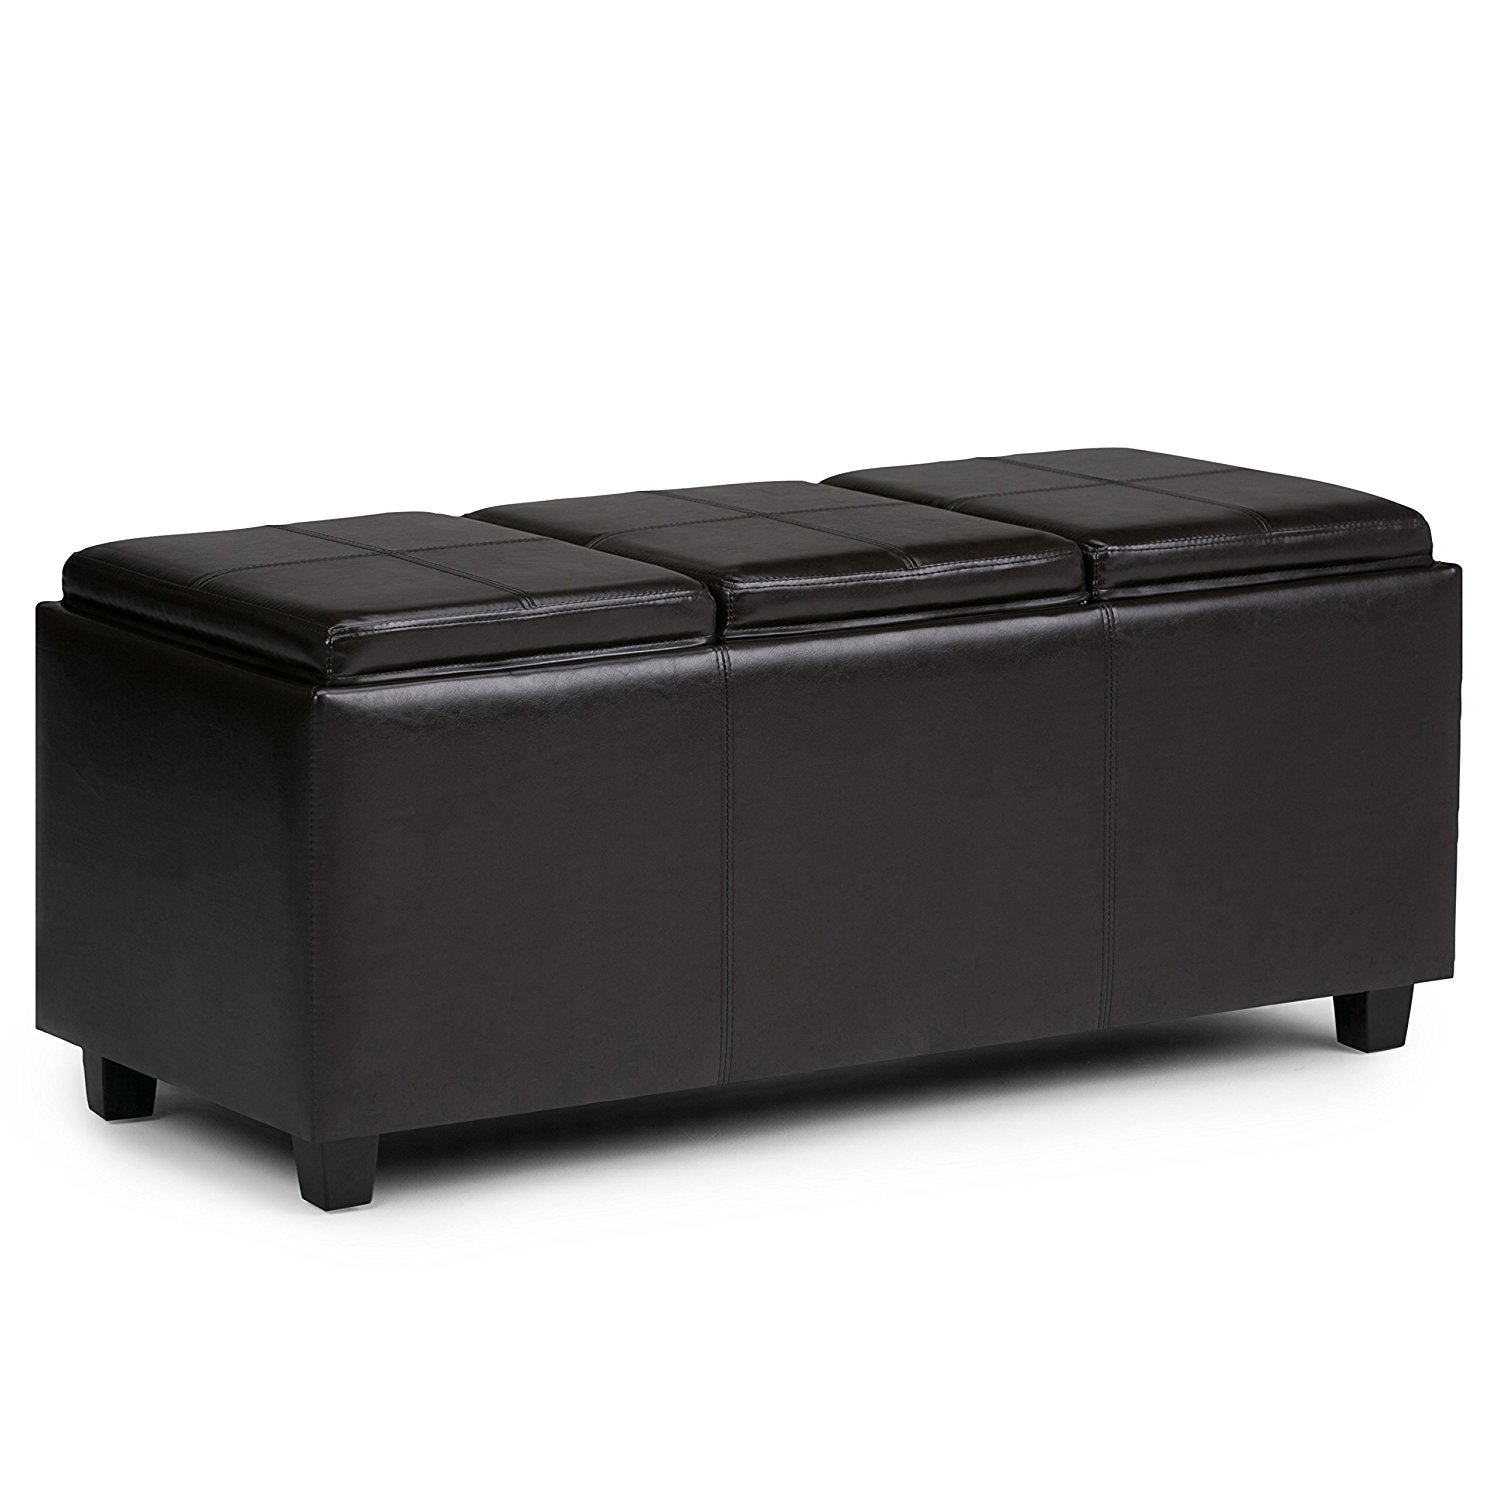 Simpli Home Avalon Faux Leather Rectangular Storage Ottoman with 3 Serving Trays, Large, Brown